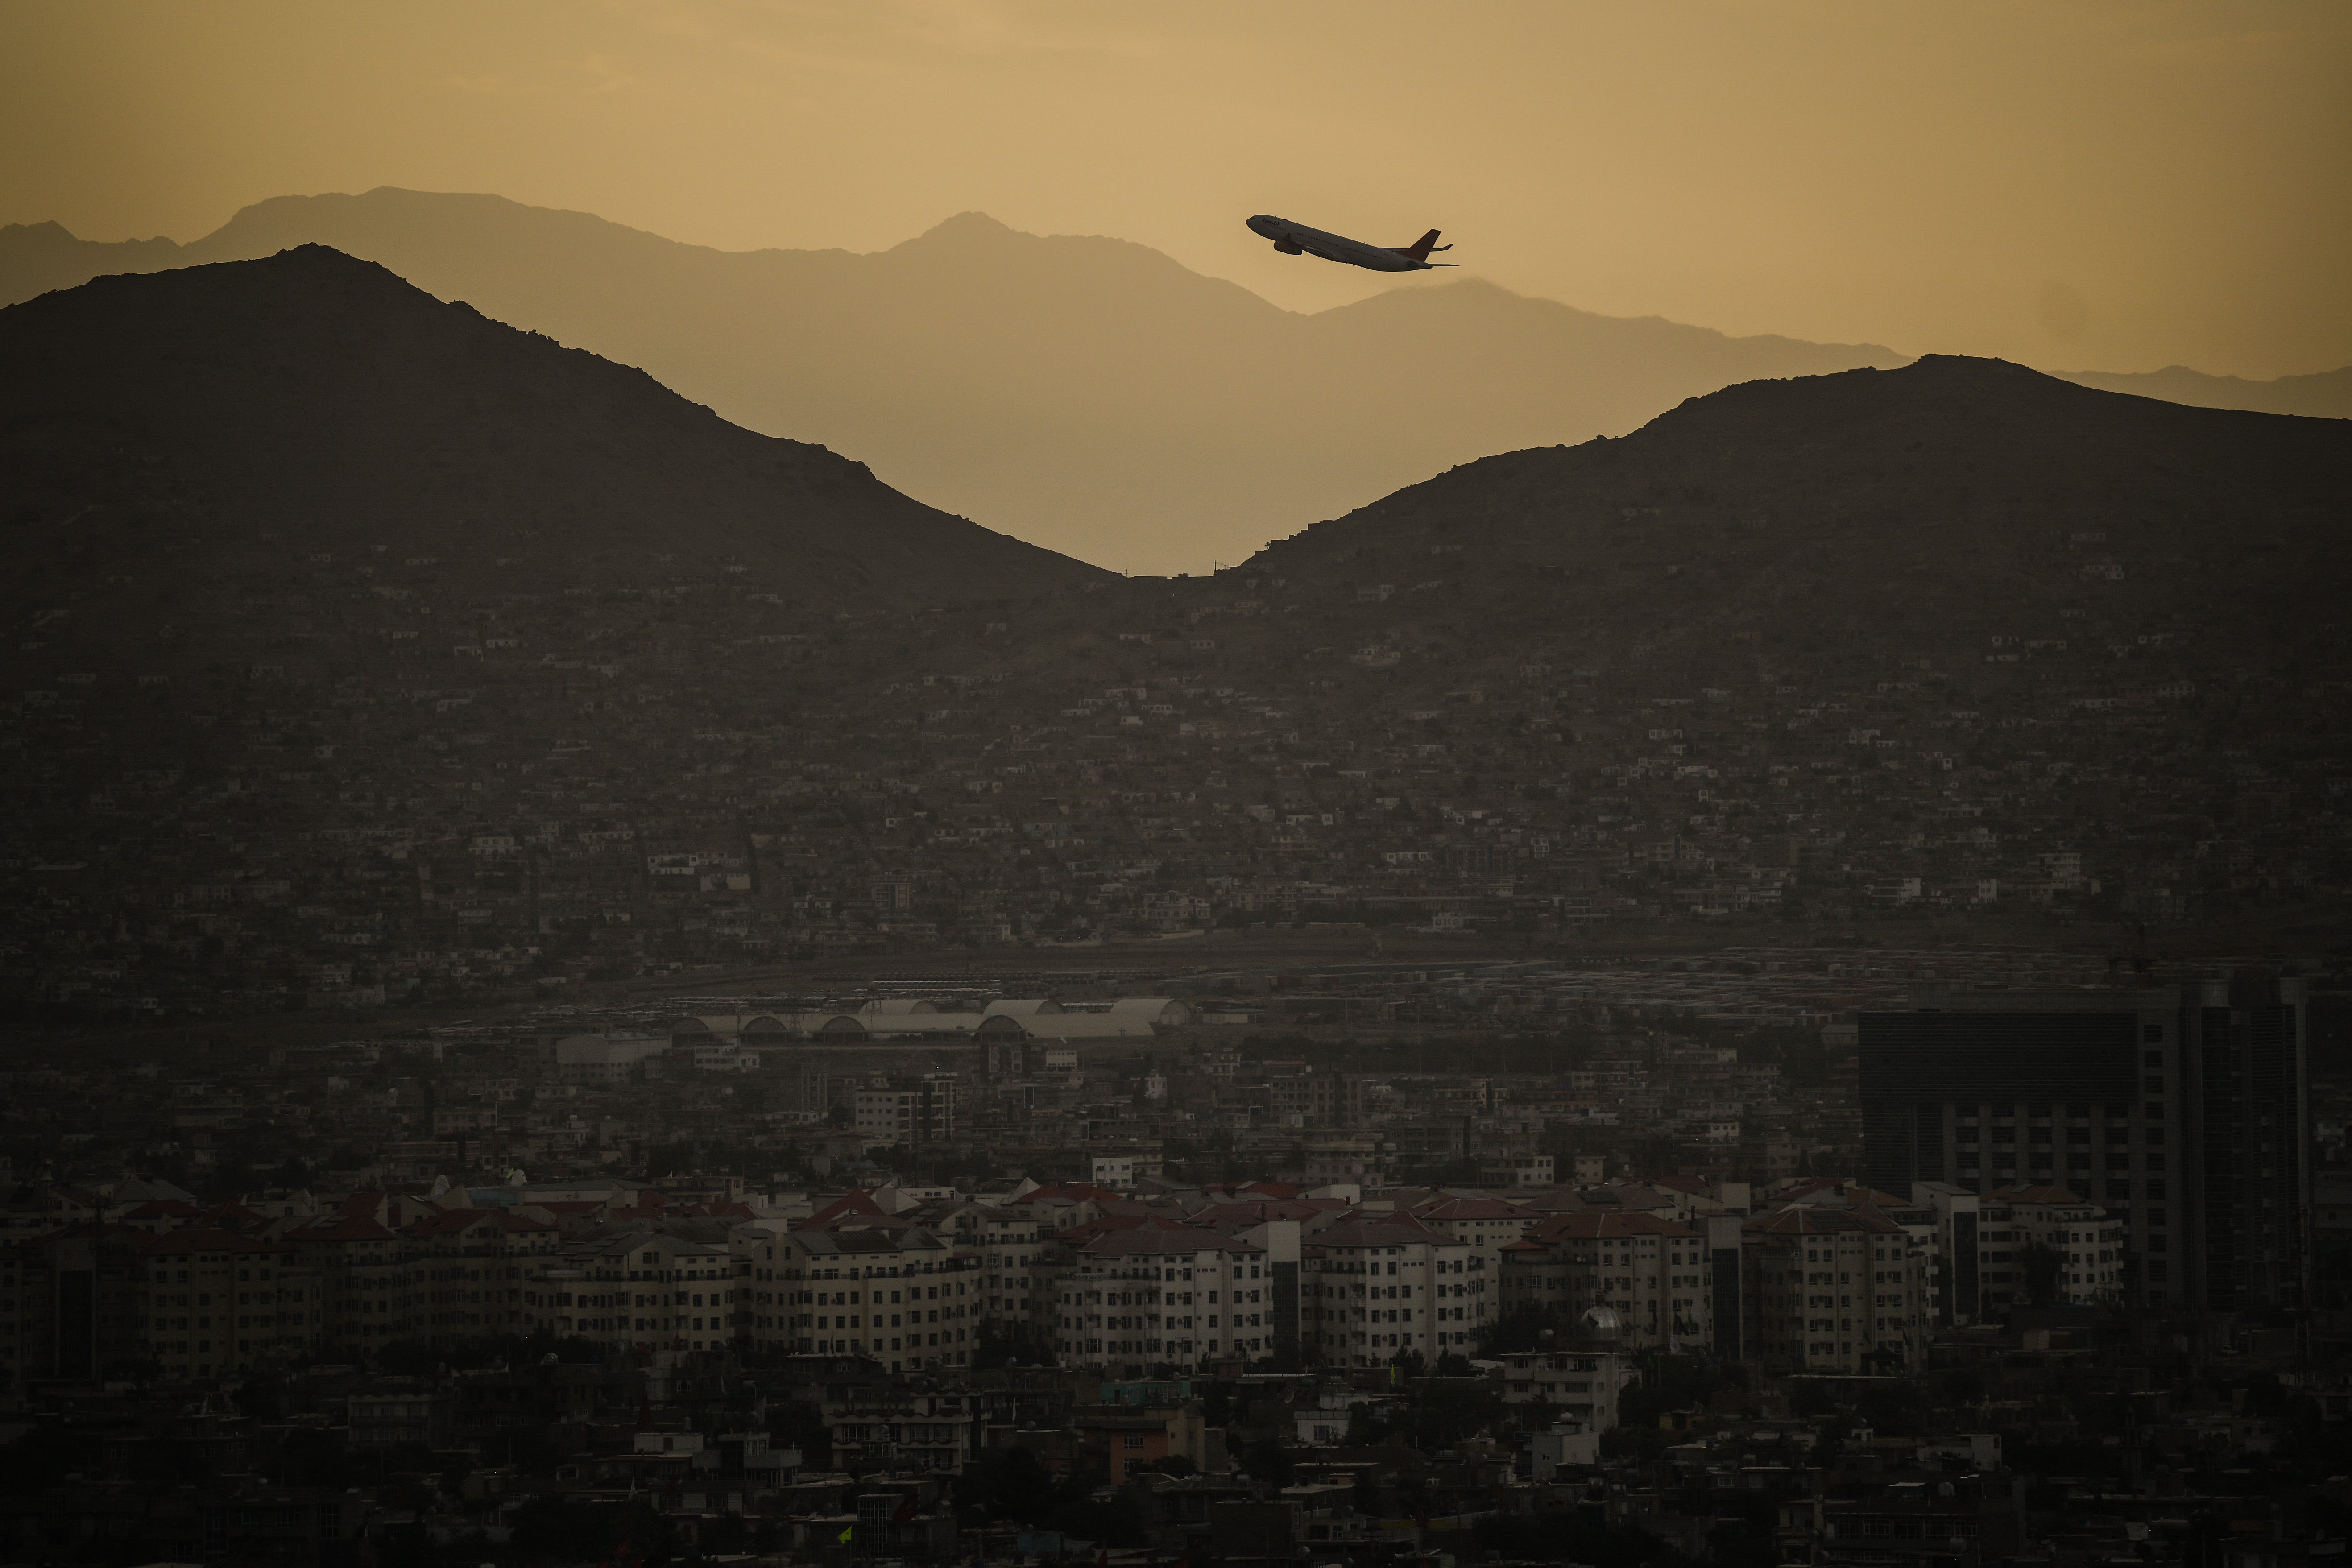 A plane takes off from Hamid Karzai International airport in Kabul, Afghanistan